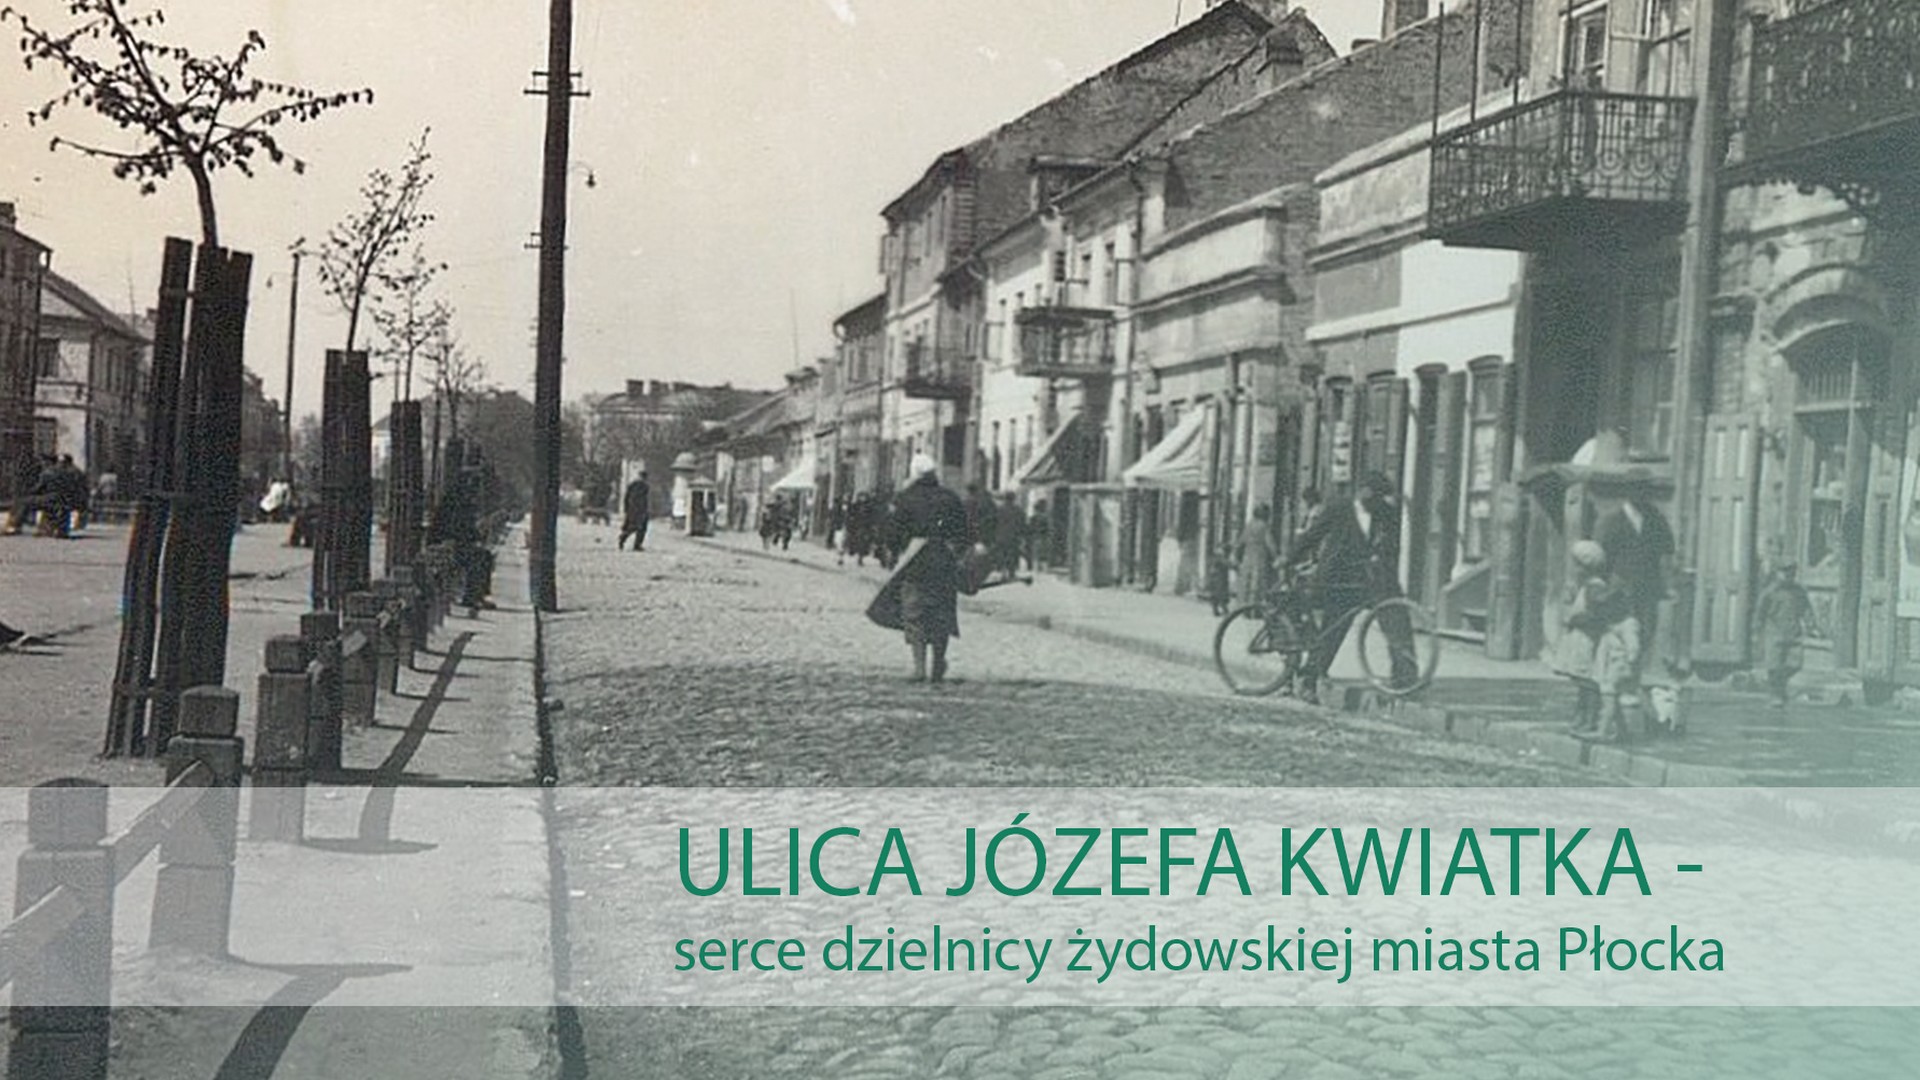 Kwiatka Street. The 6th guidebook by the Nobiscum Foundation to be published this year